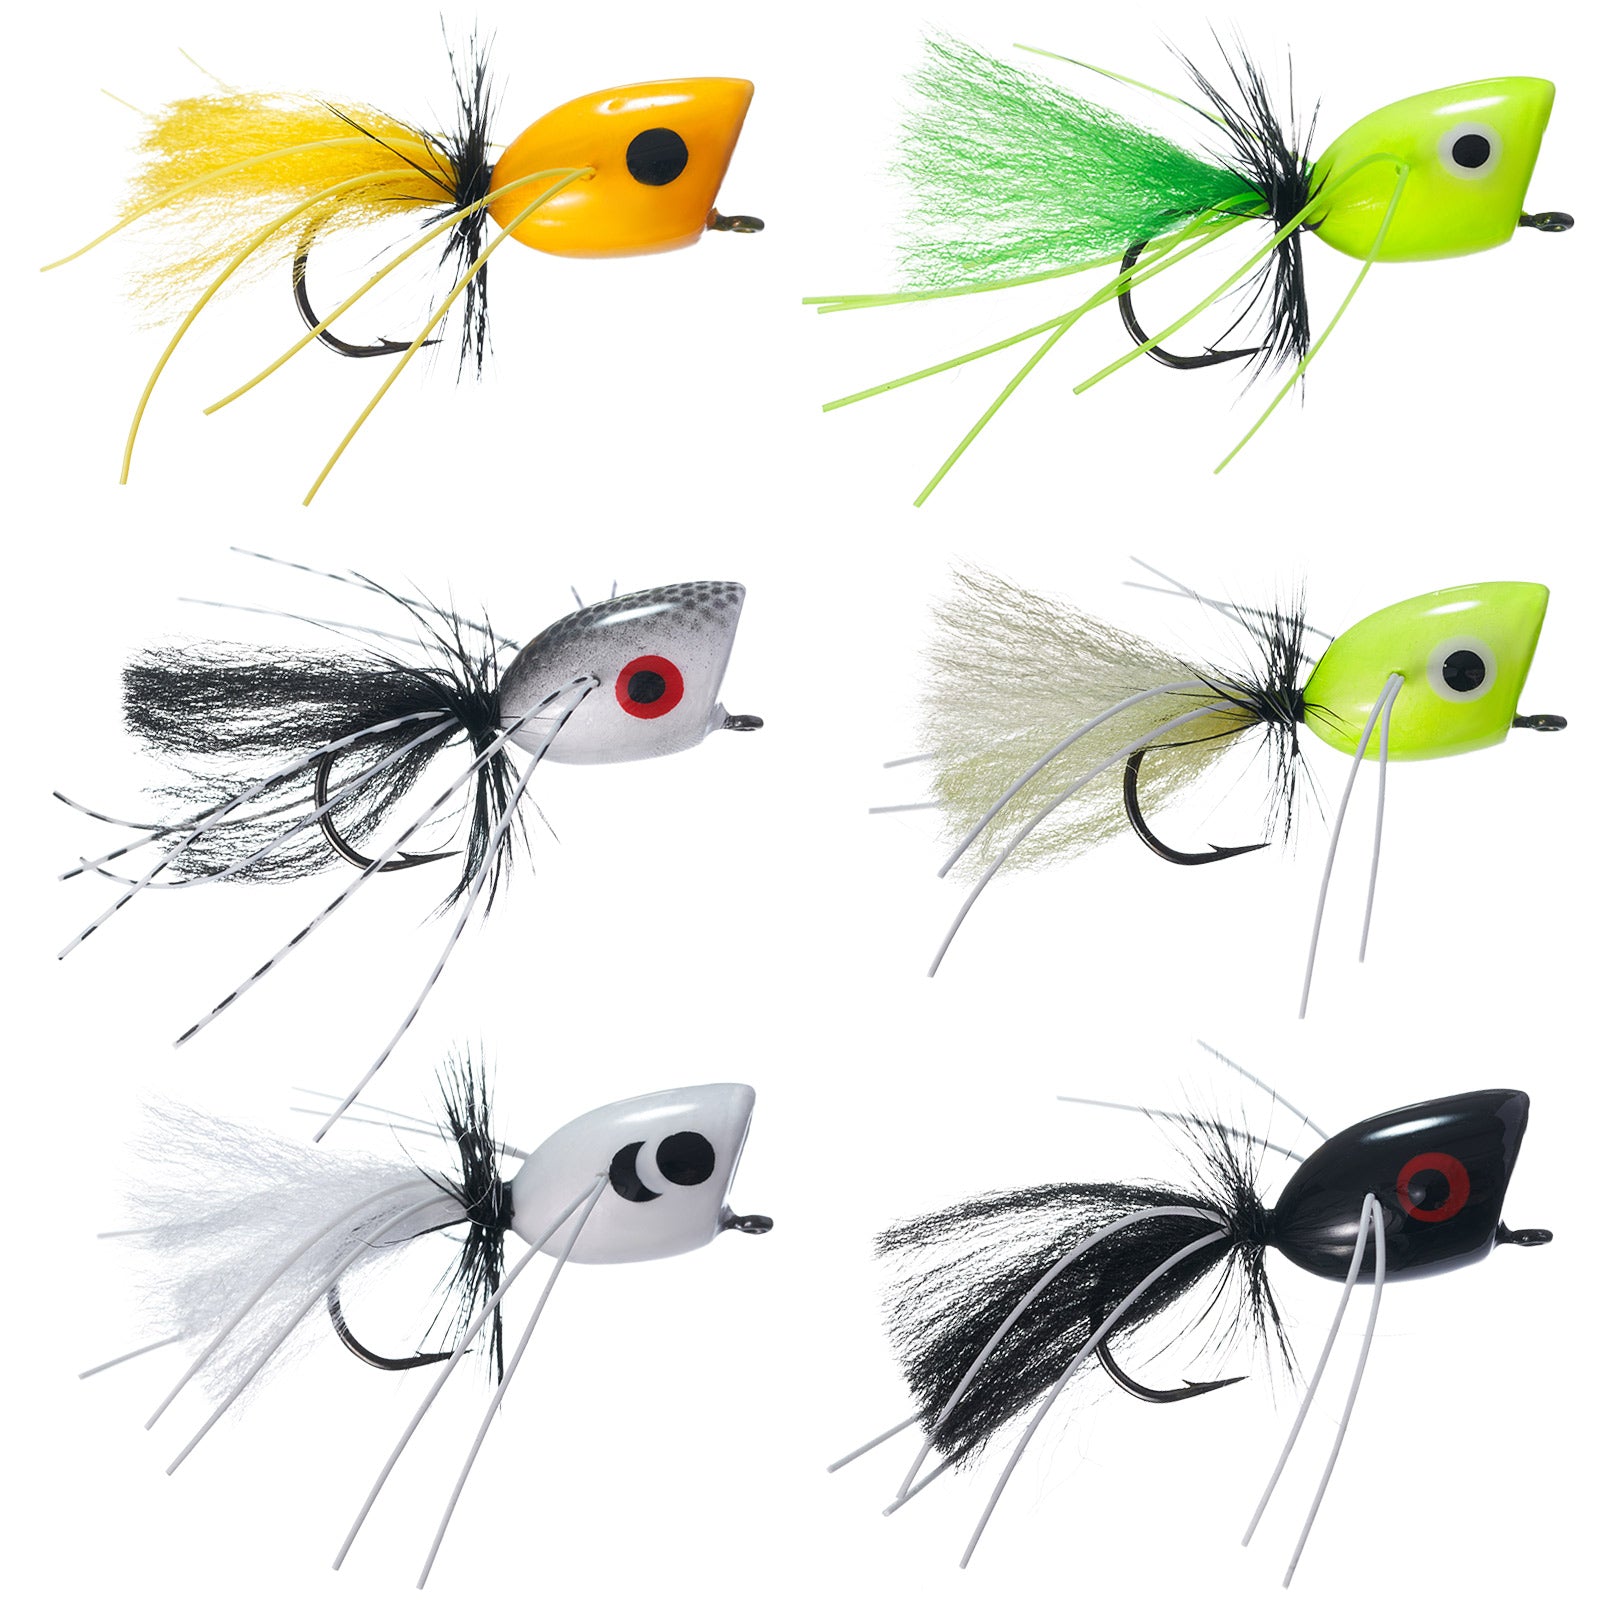  Fly Fishing Popper Lures Kit,Bass Popper Flies Dry Fly Fishing  Flies Topwater Panfish Bluegill Popper Bait Bug with Hooks for Freshwater :  Sports & Outdoors